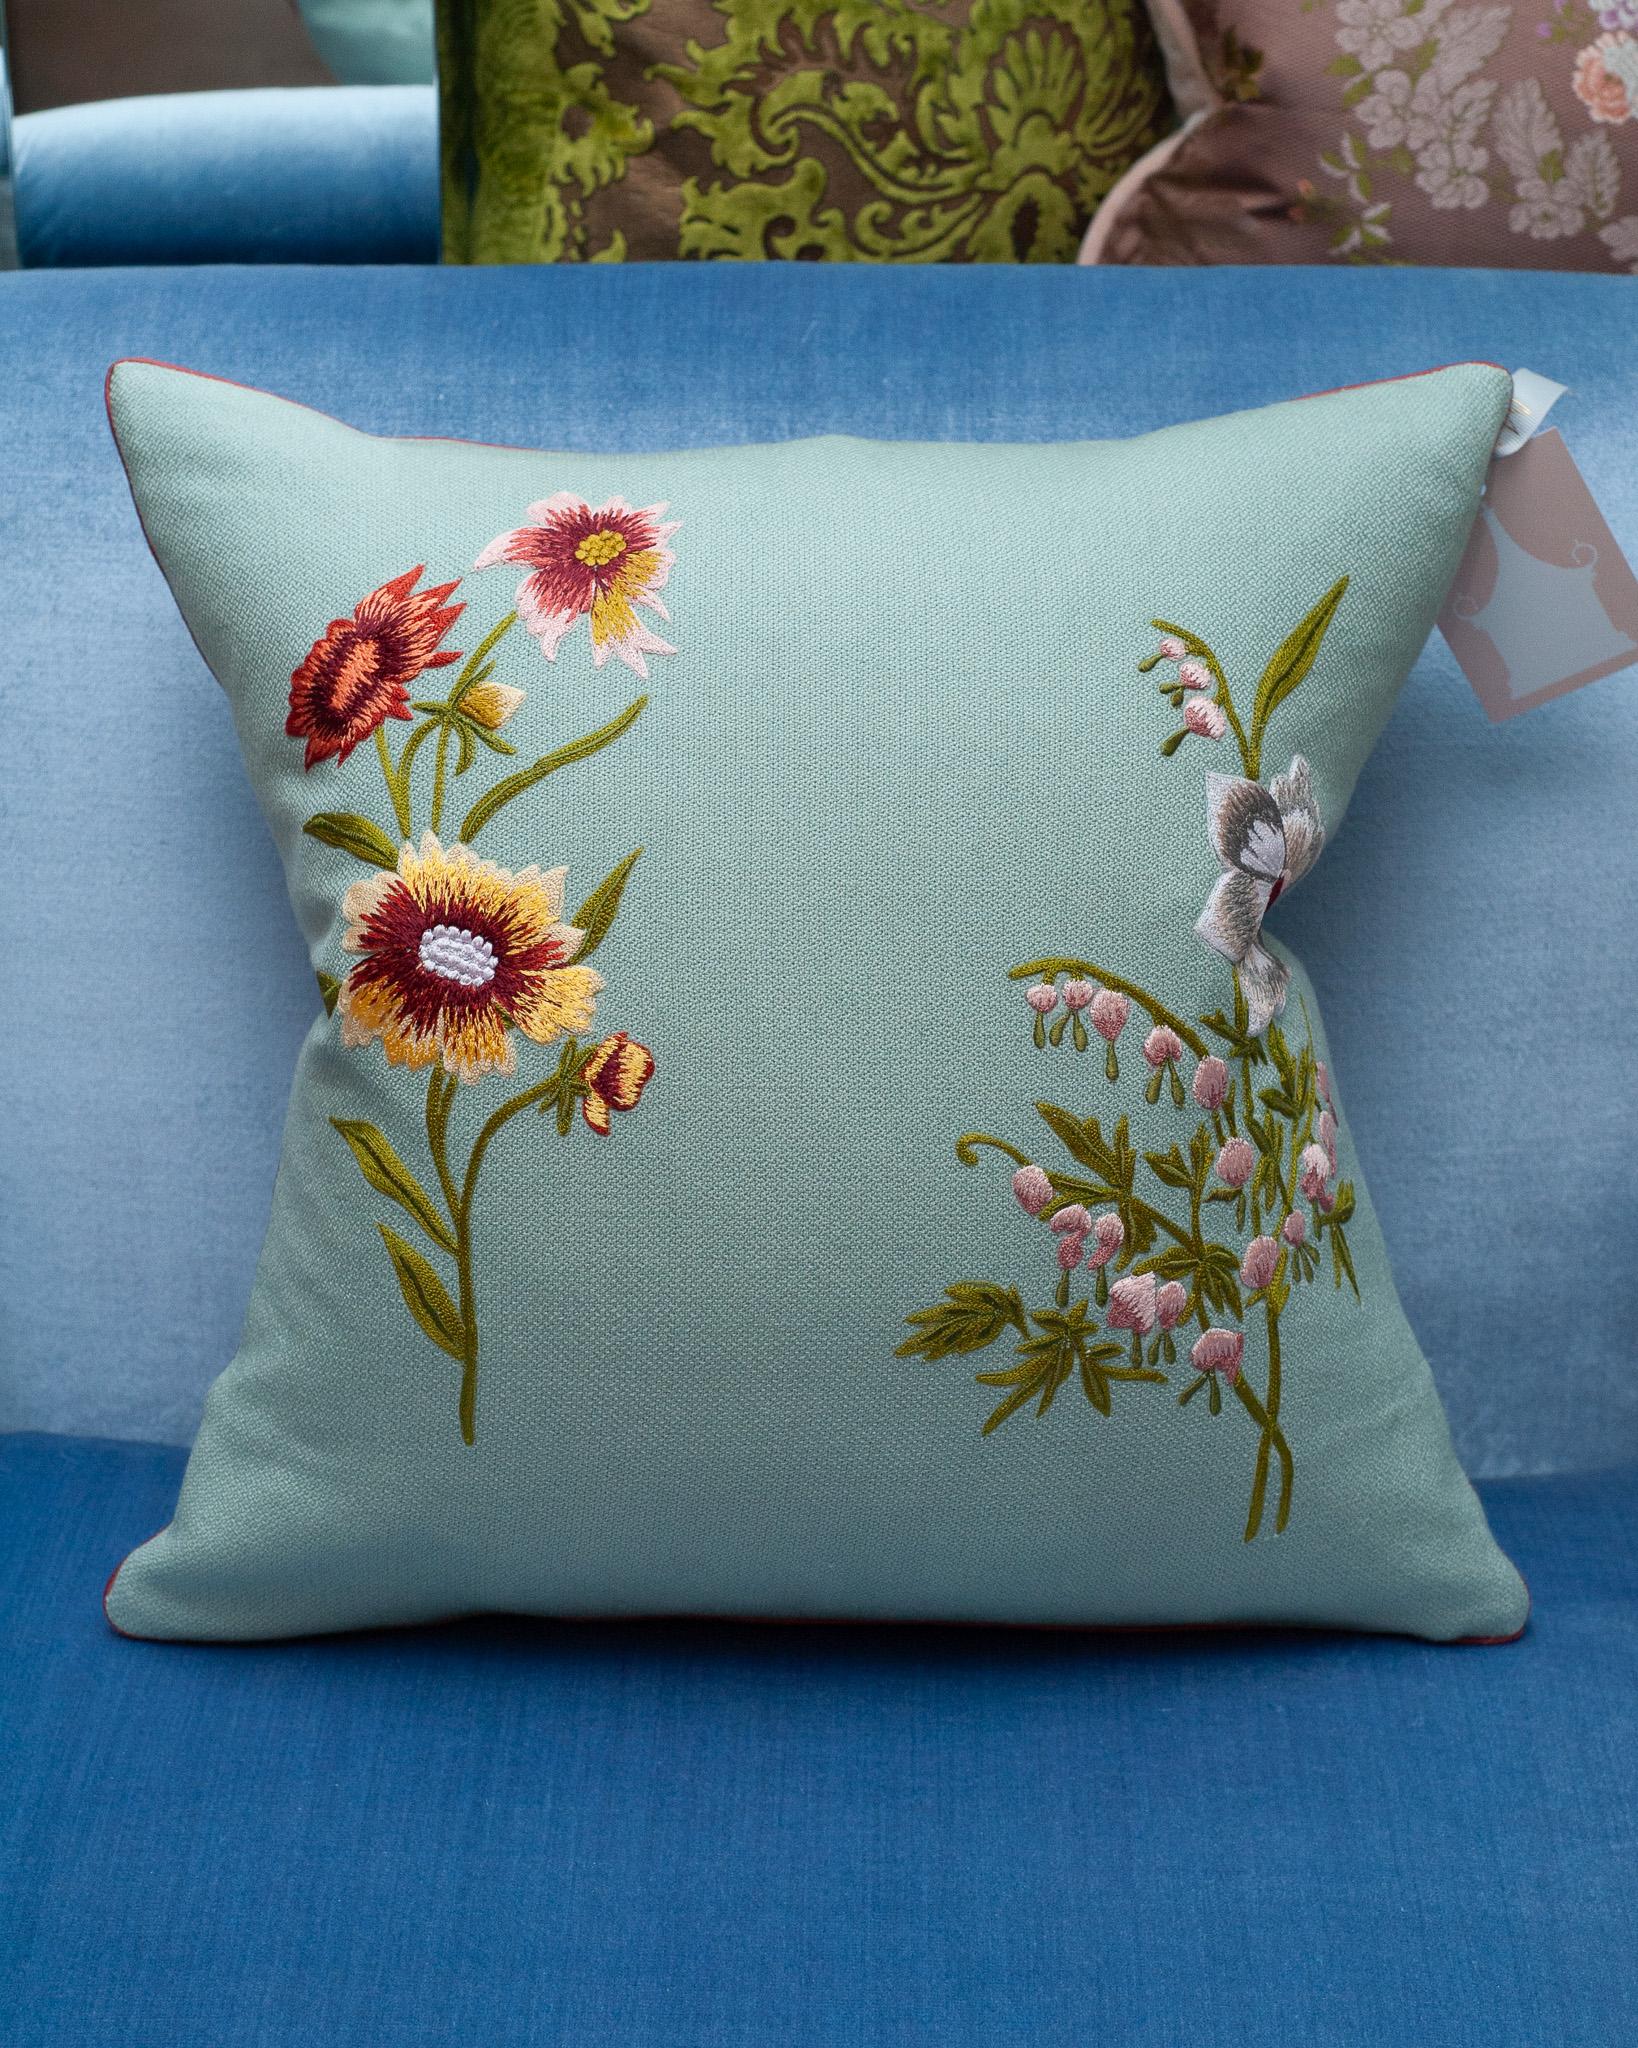 A stunning contemporary soft blue merino wool and linen pillow, trimmed with red piping and embroidered in wool with double floral motifs. Filled with the highest quality Canadian down and feather for a pillow that feels as luxurious as it is